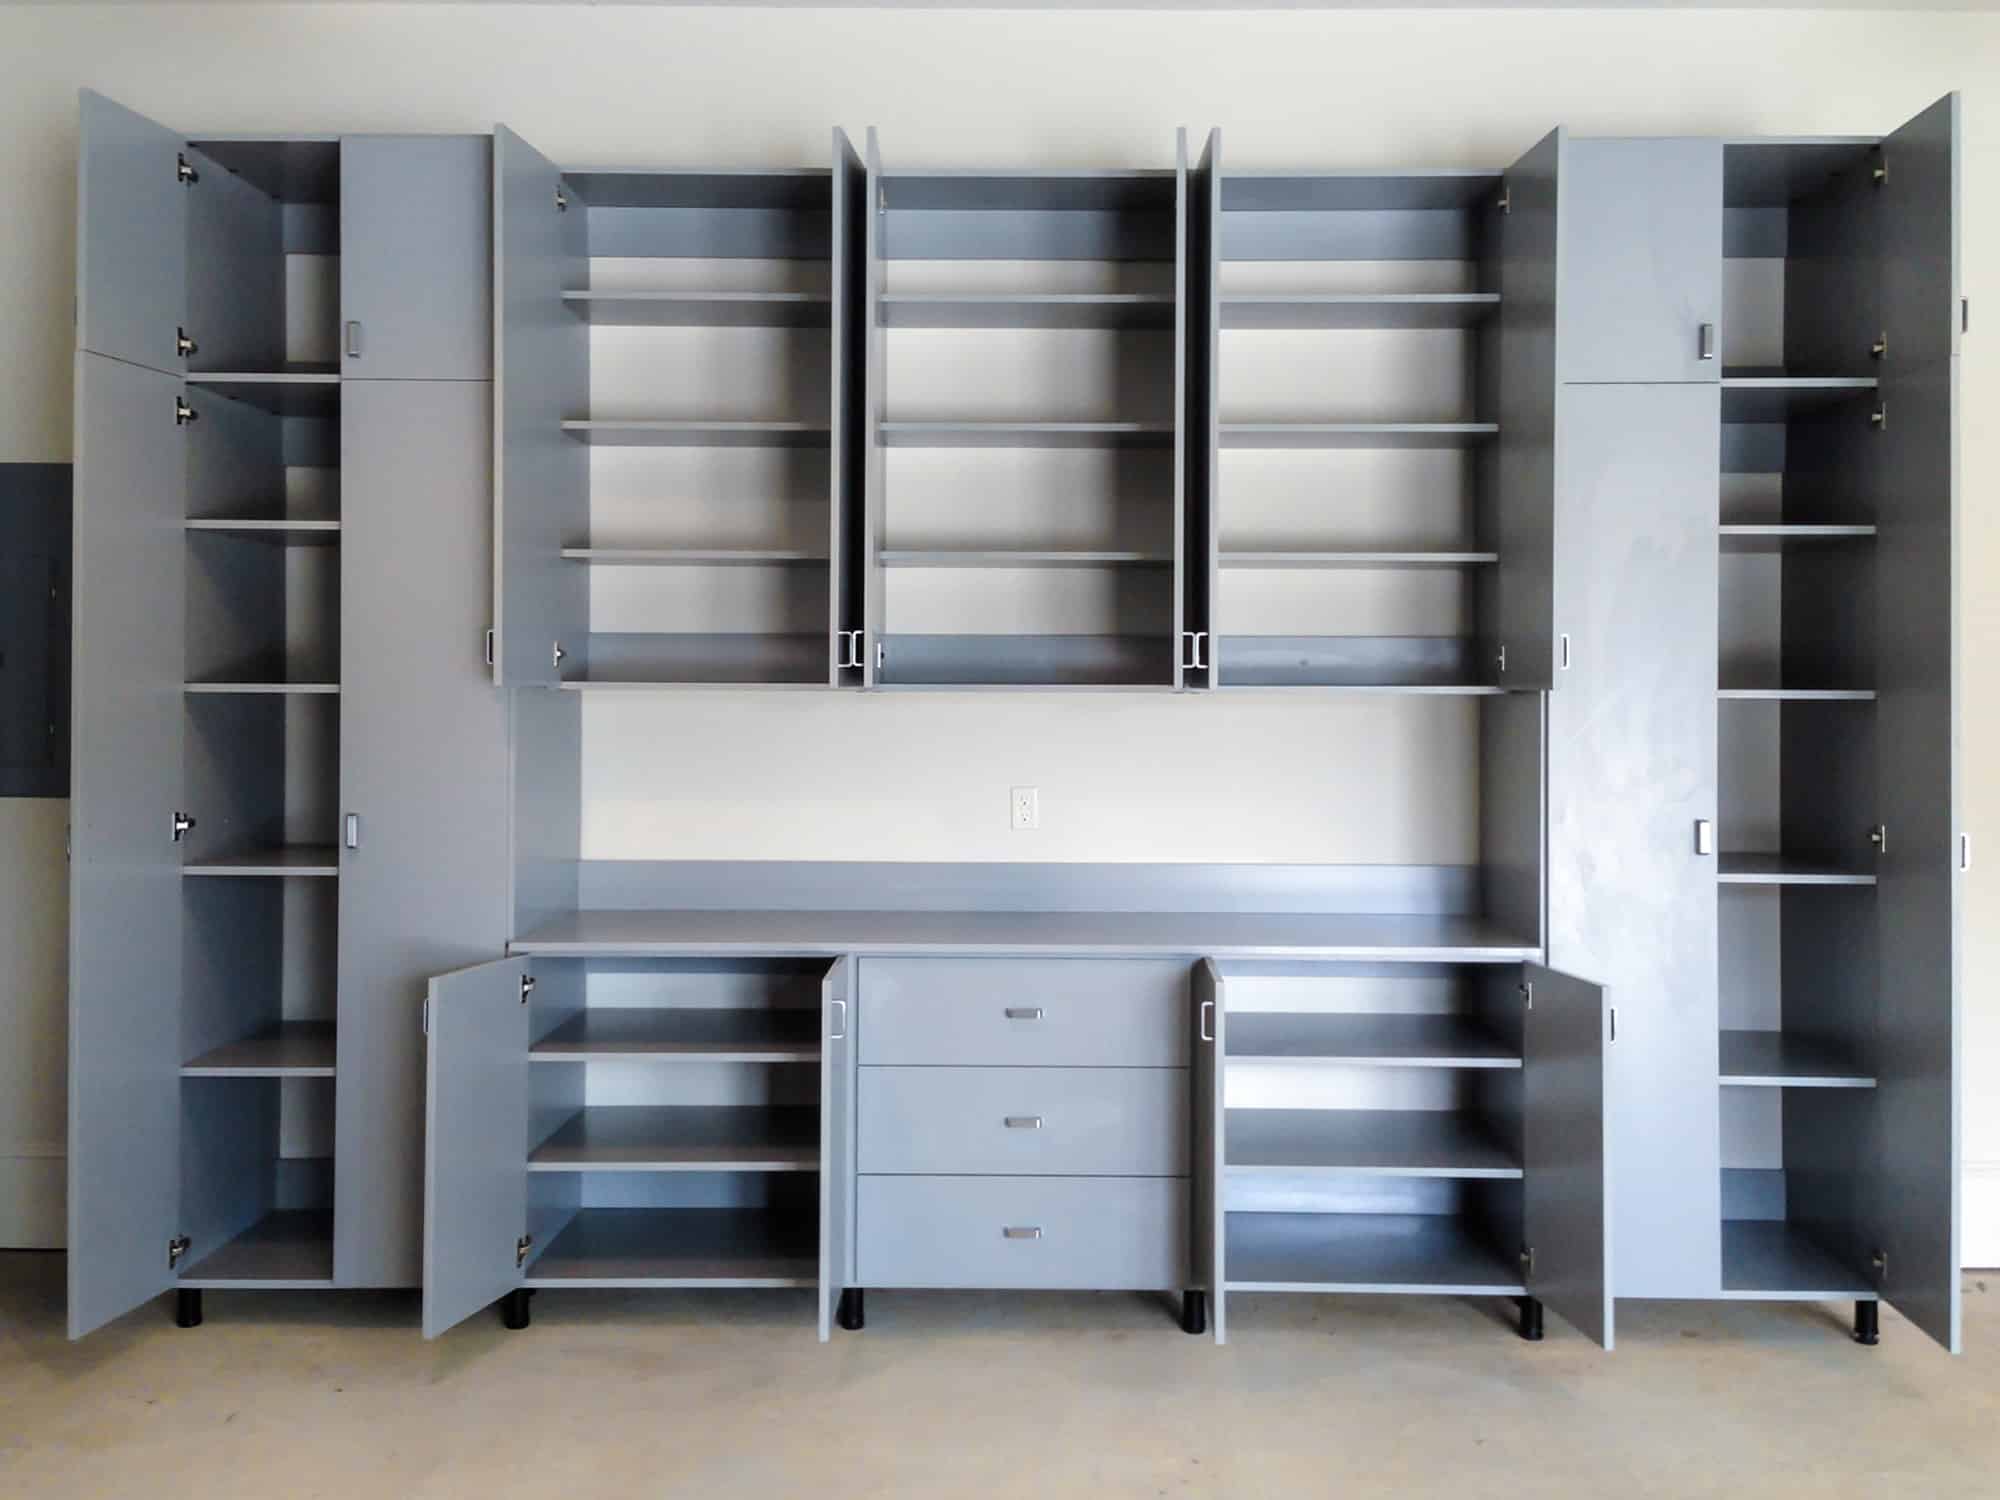 Grey garage storage system with cabinets and shelving